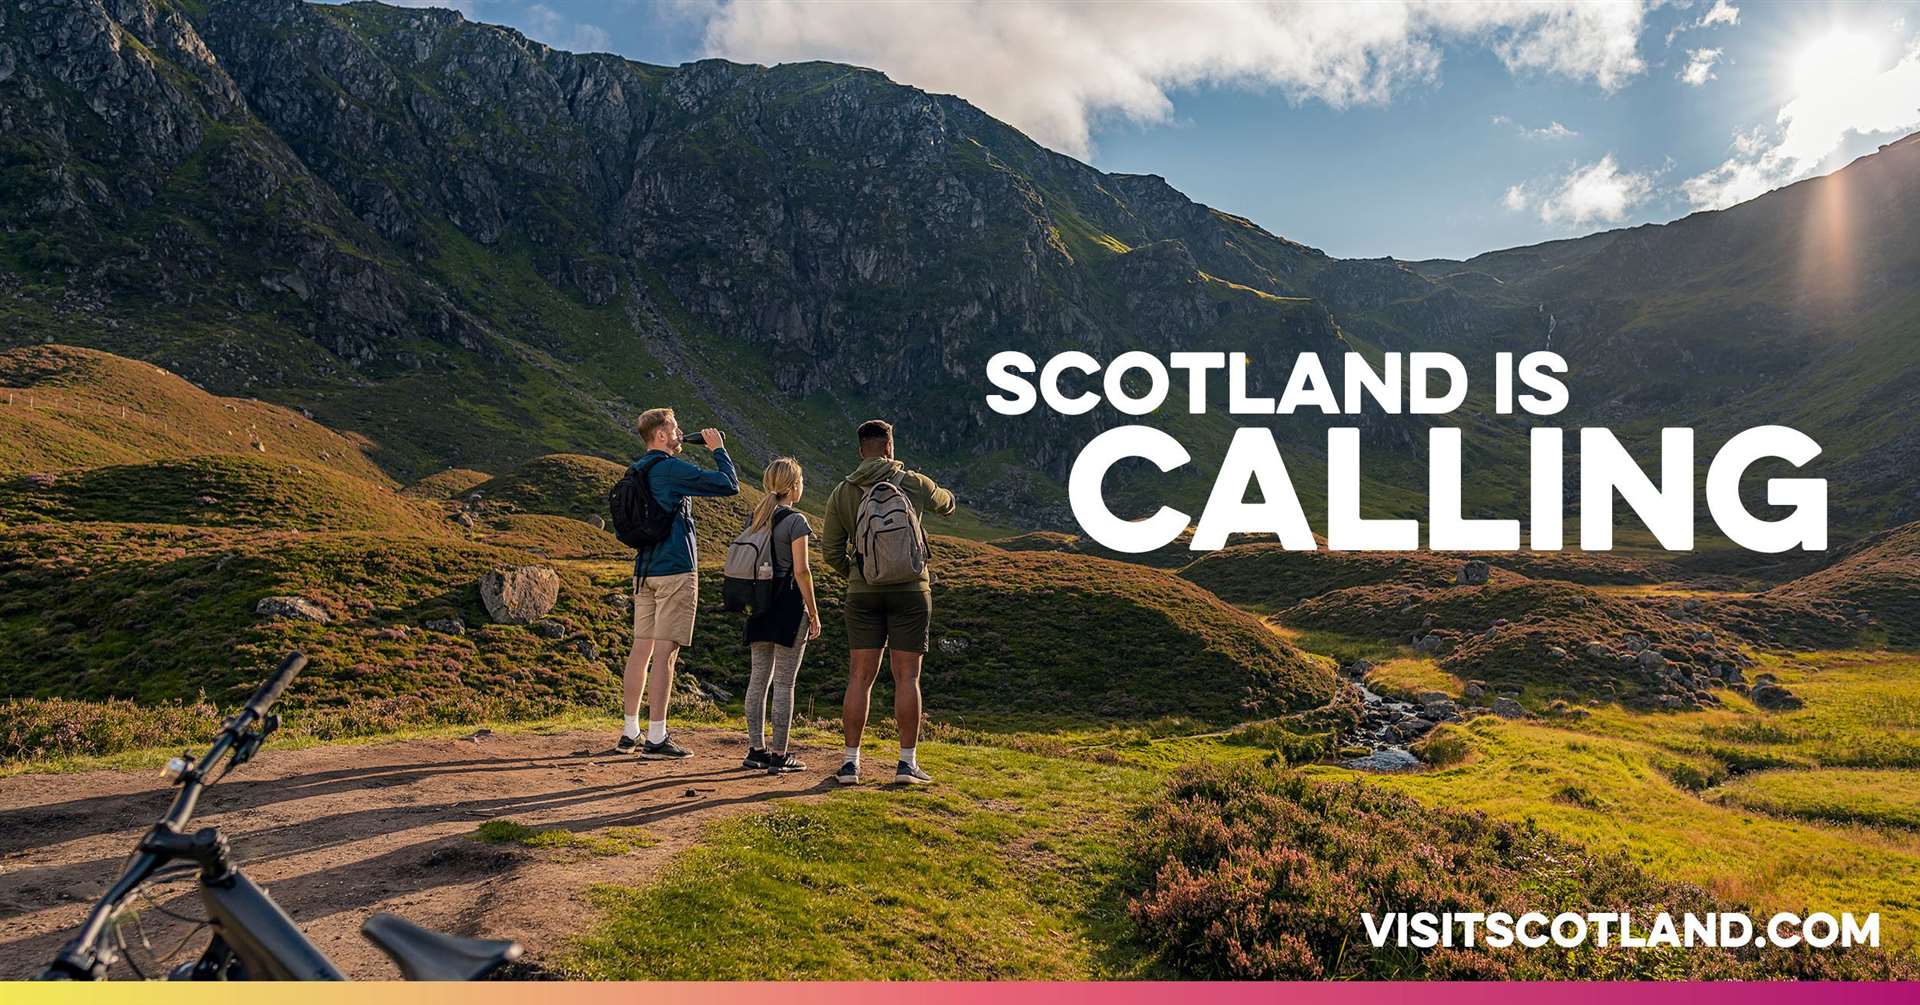 VisitScotland's Scotland is Calling campaign aims to help revive the fortunes of the country's battered tourism industry.